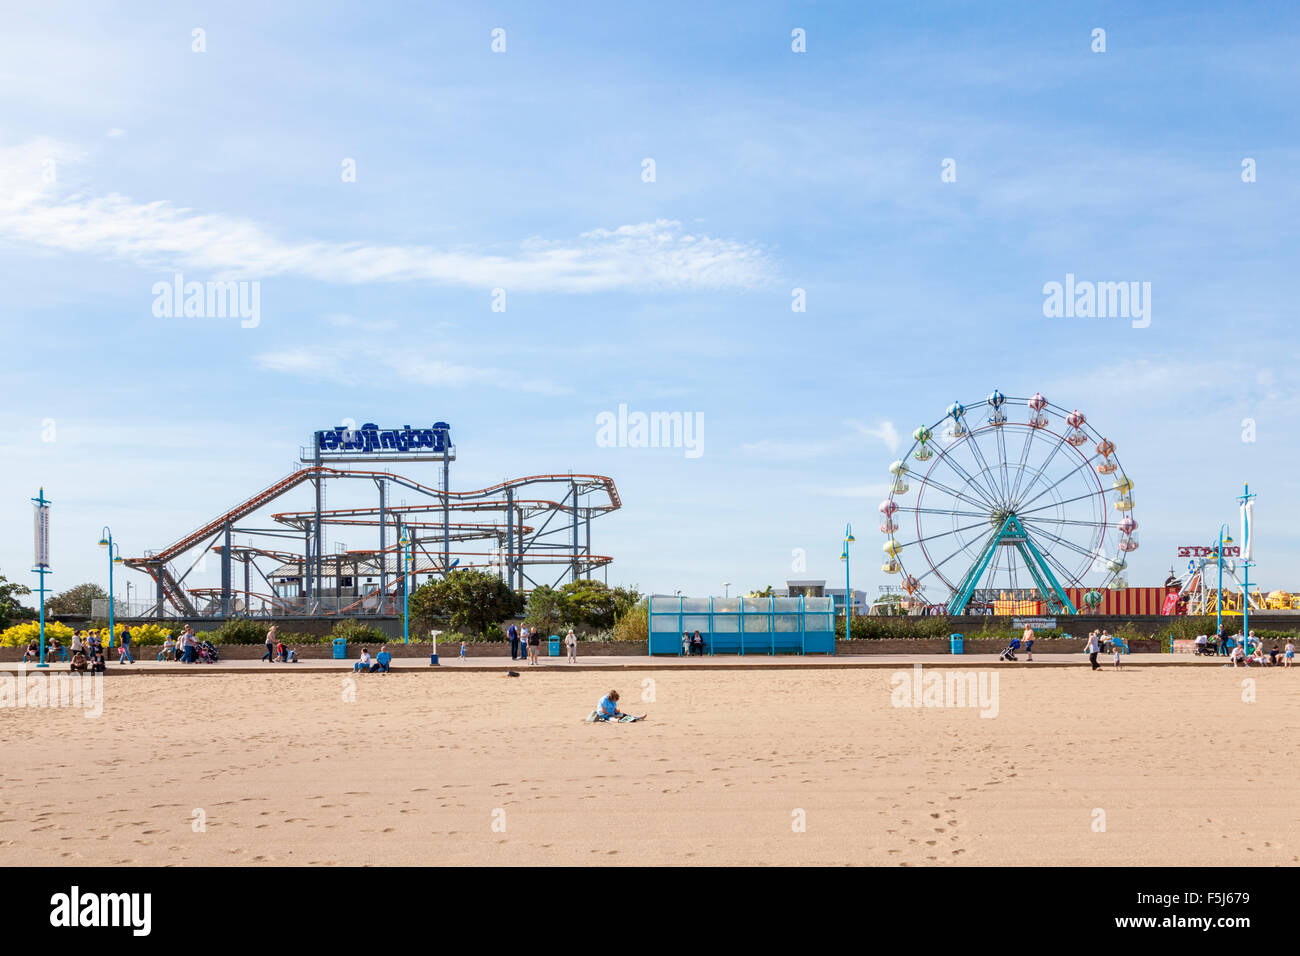 Pleasure Beach fairground by the beach at Skegness, Lincolnshire, England, UK Stock Photo